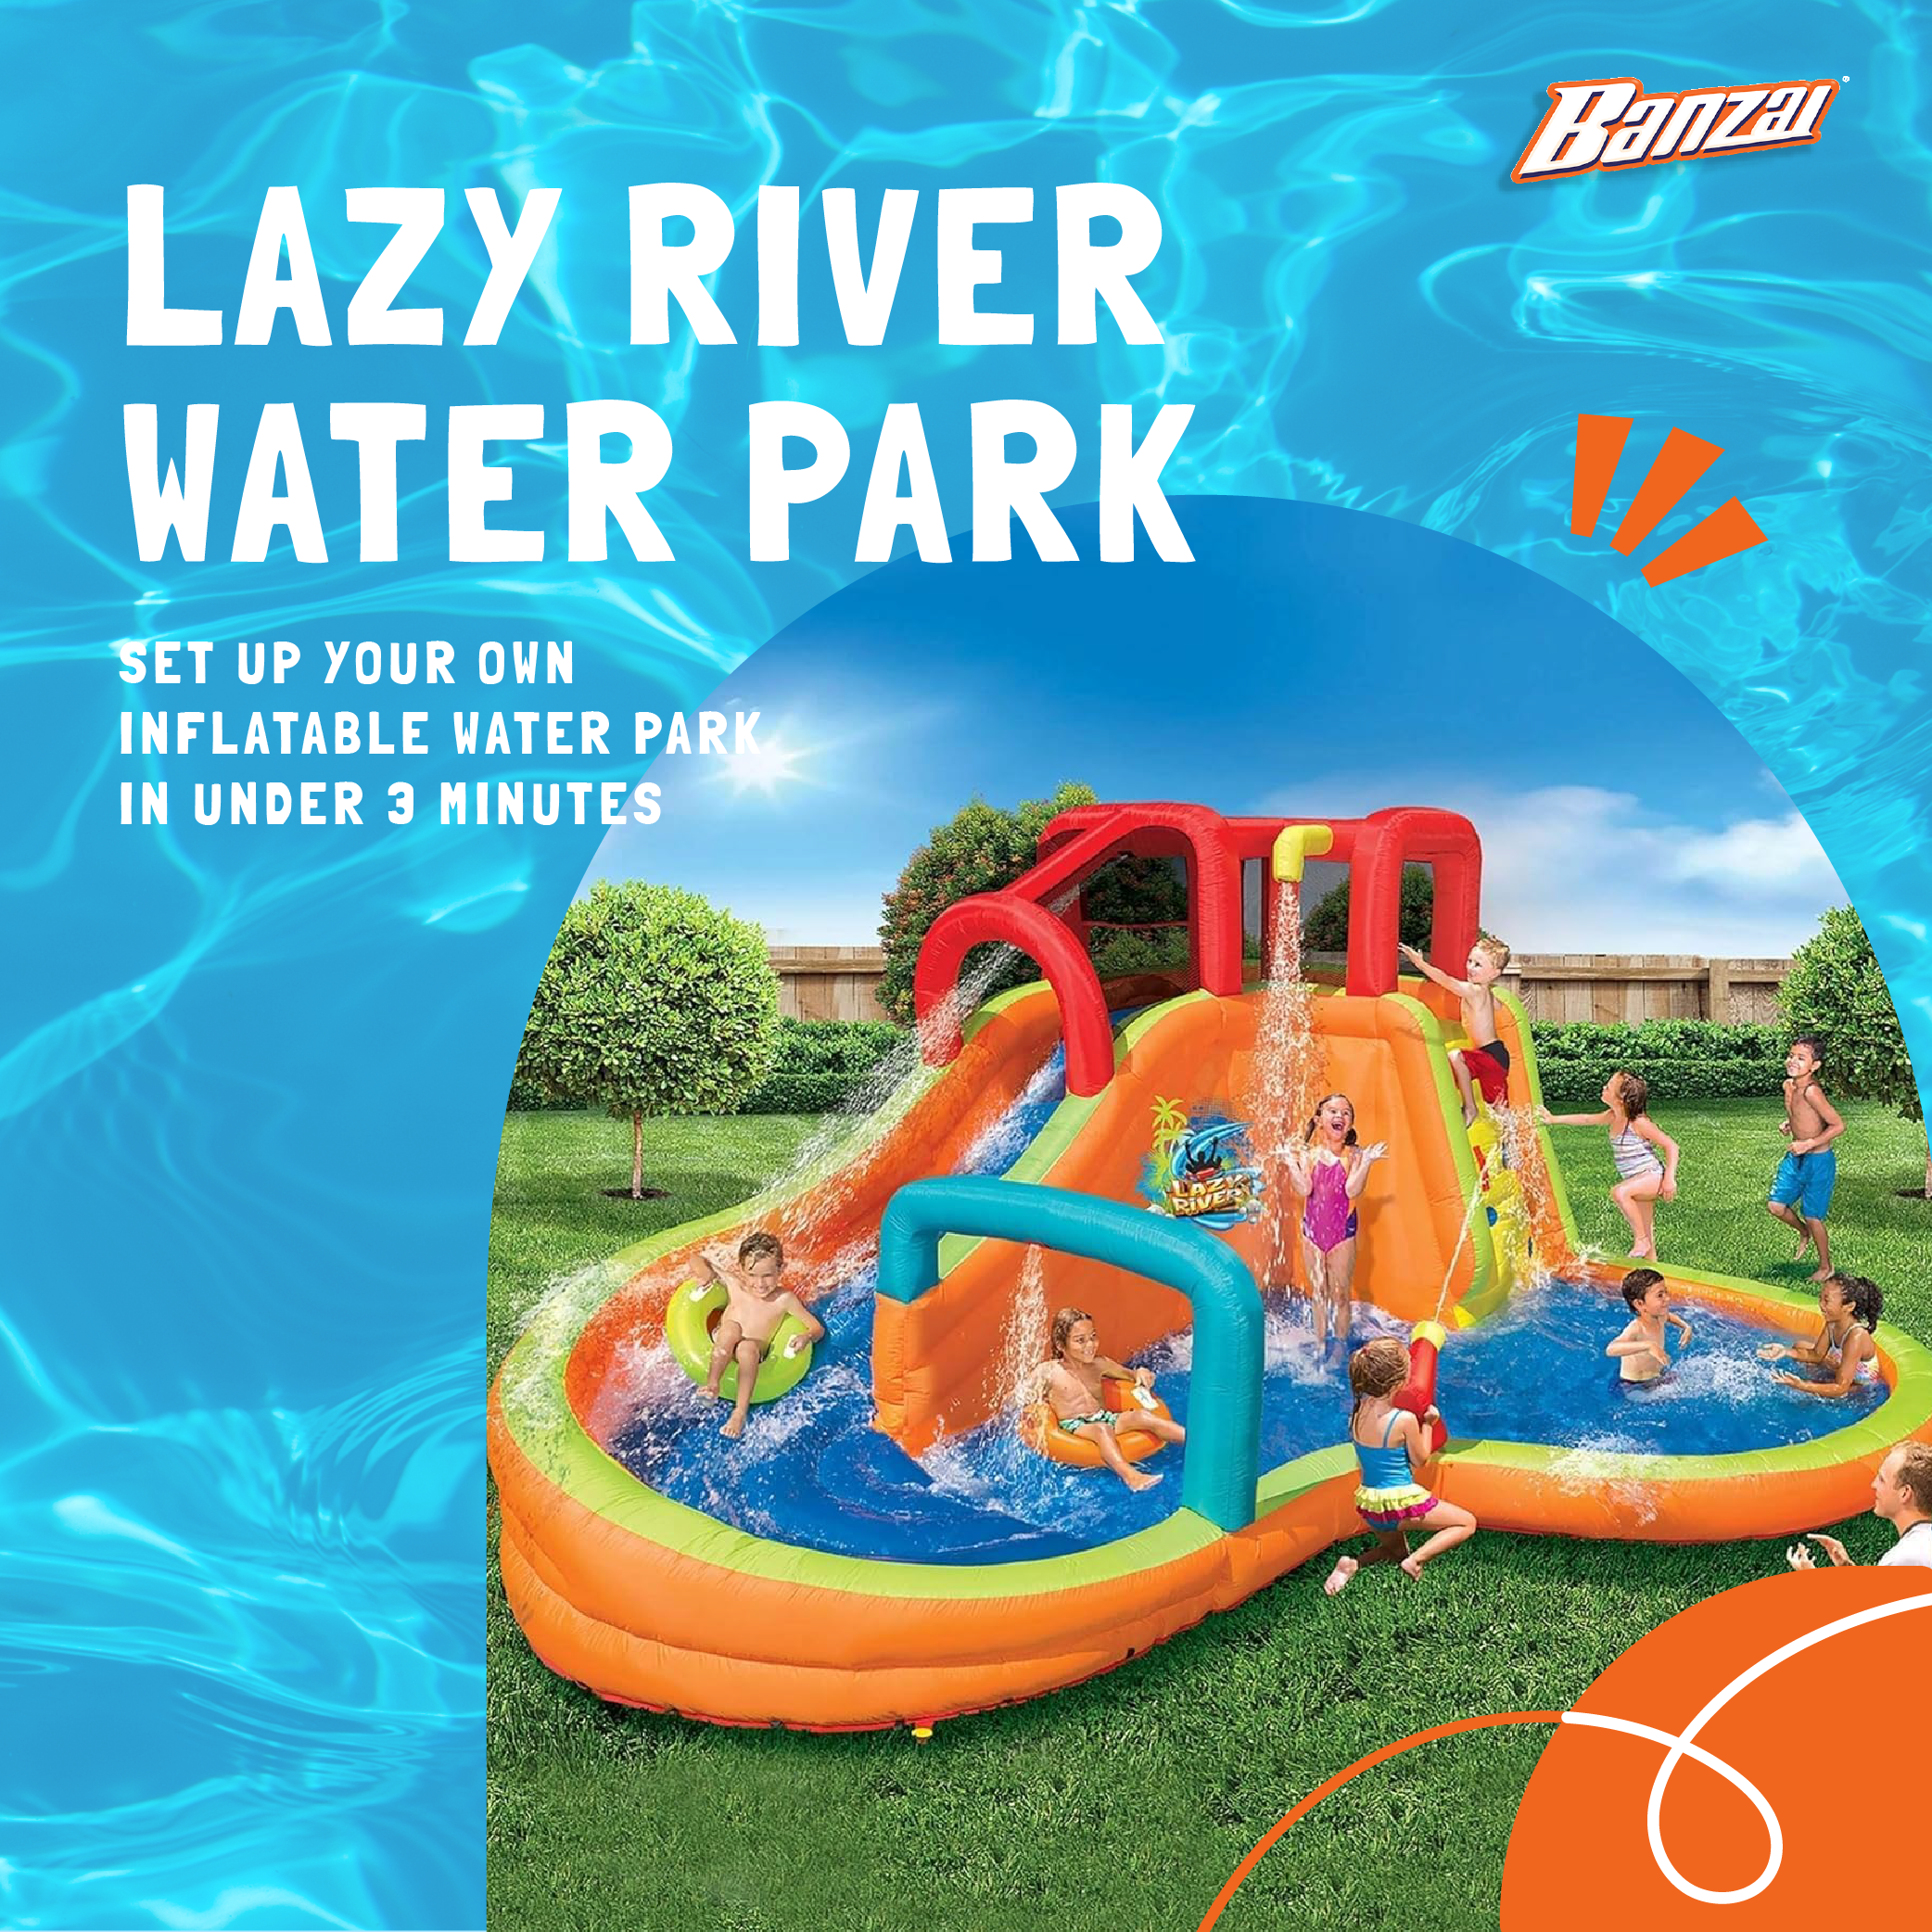 Banzai Kids Inflatable Outdoor Lazy River Adventure Water Park Slide & Pool - image 3 of 6